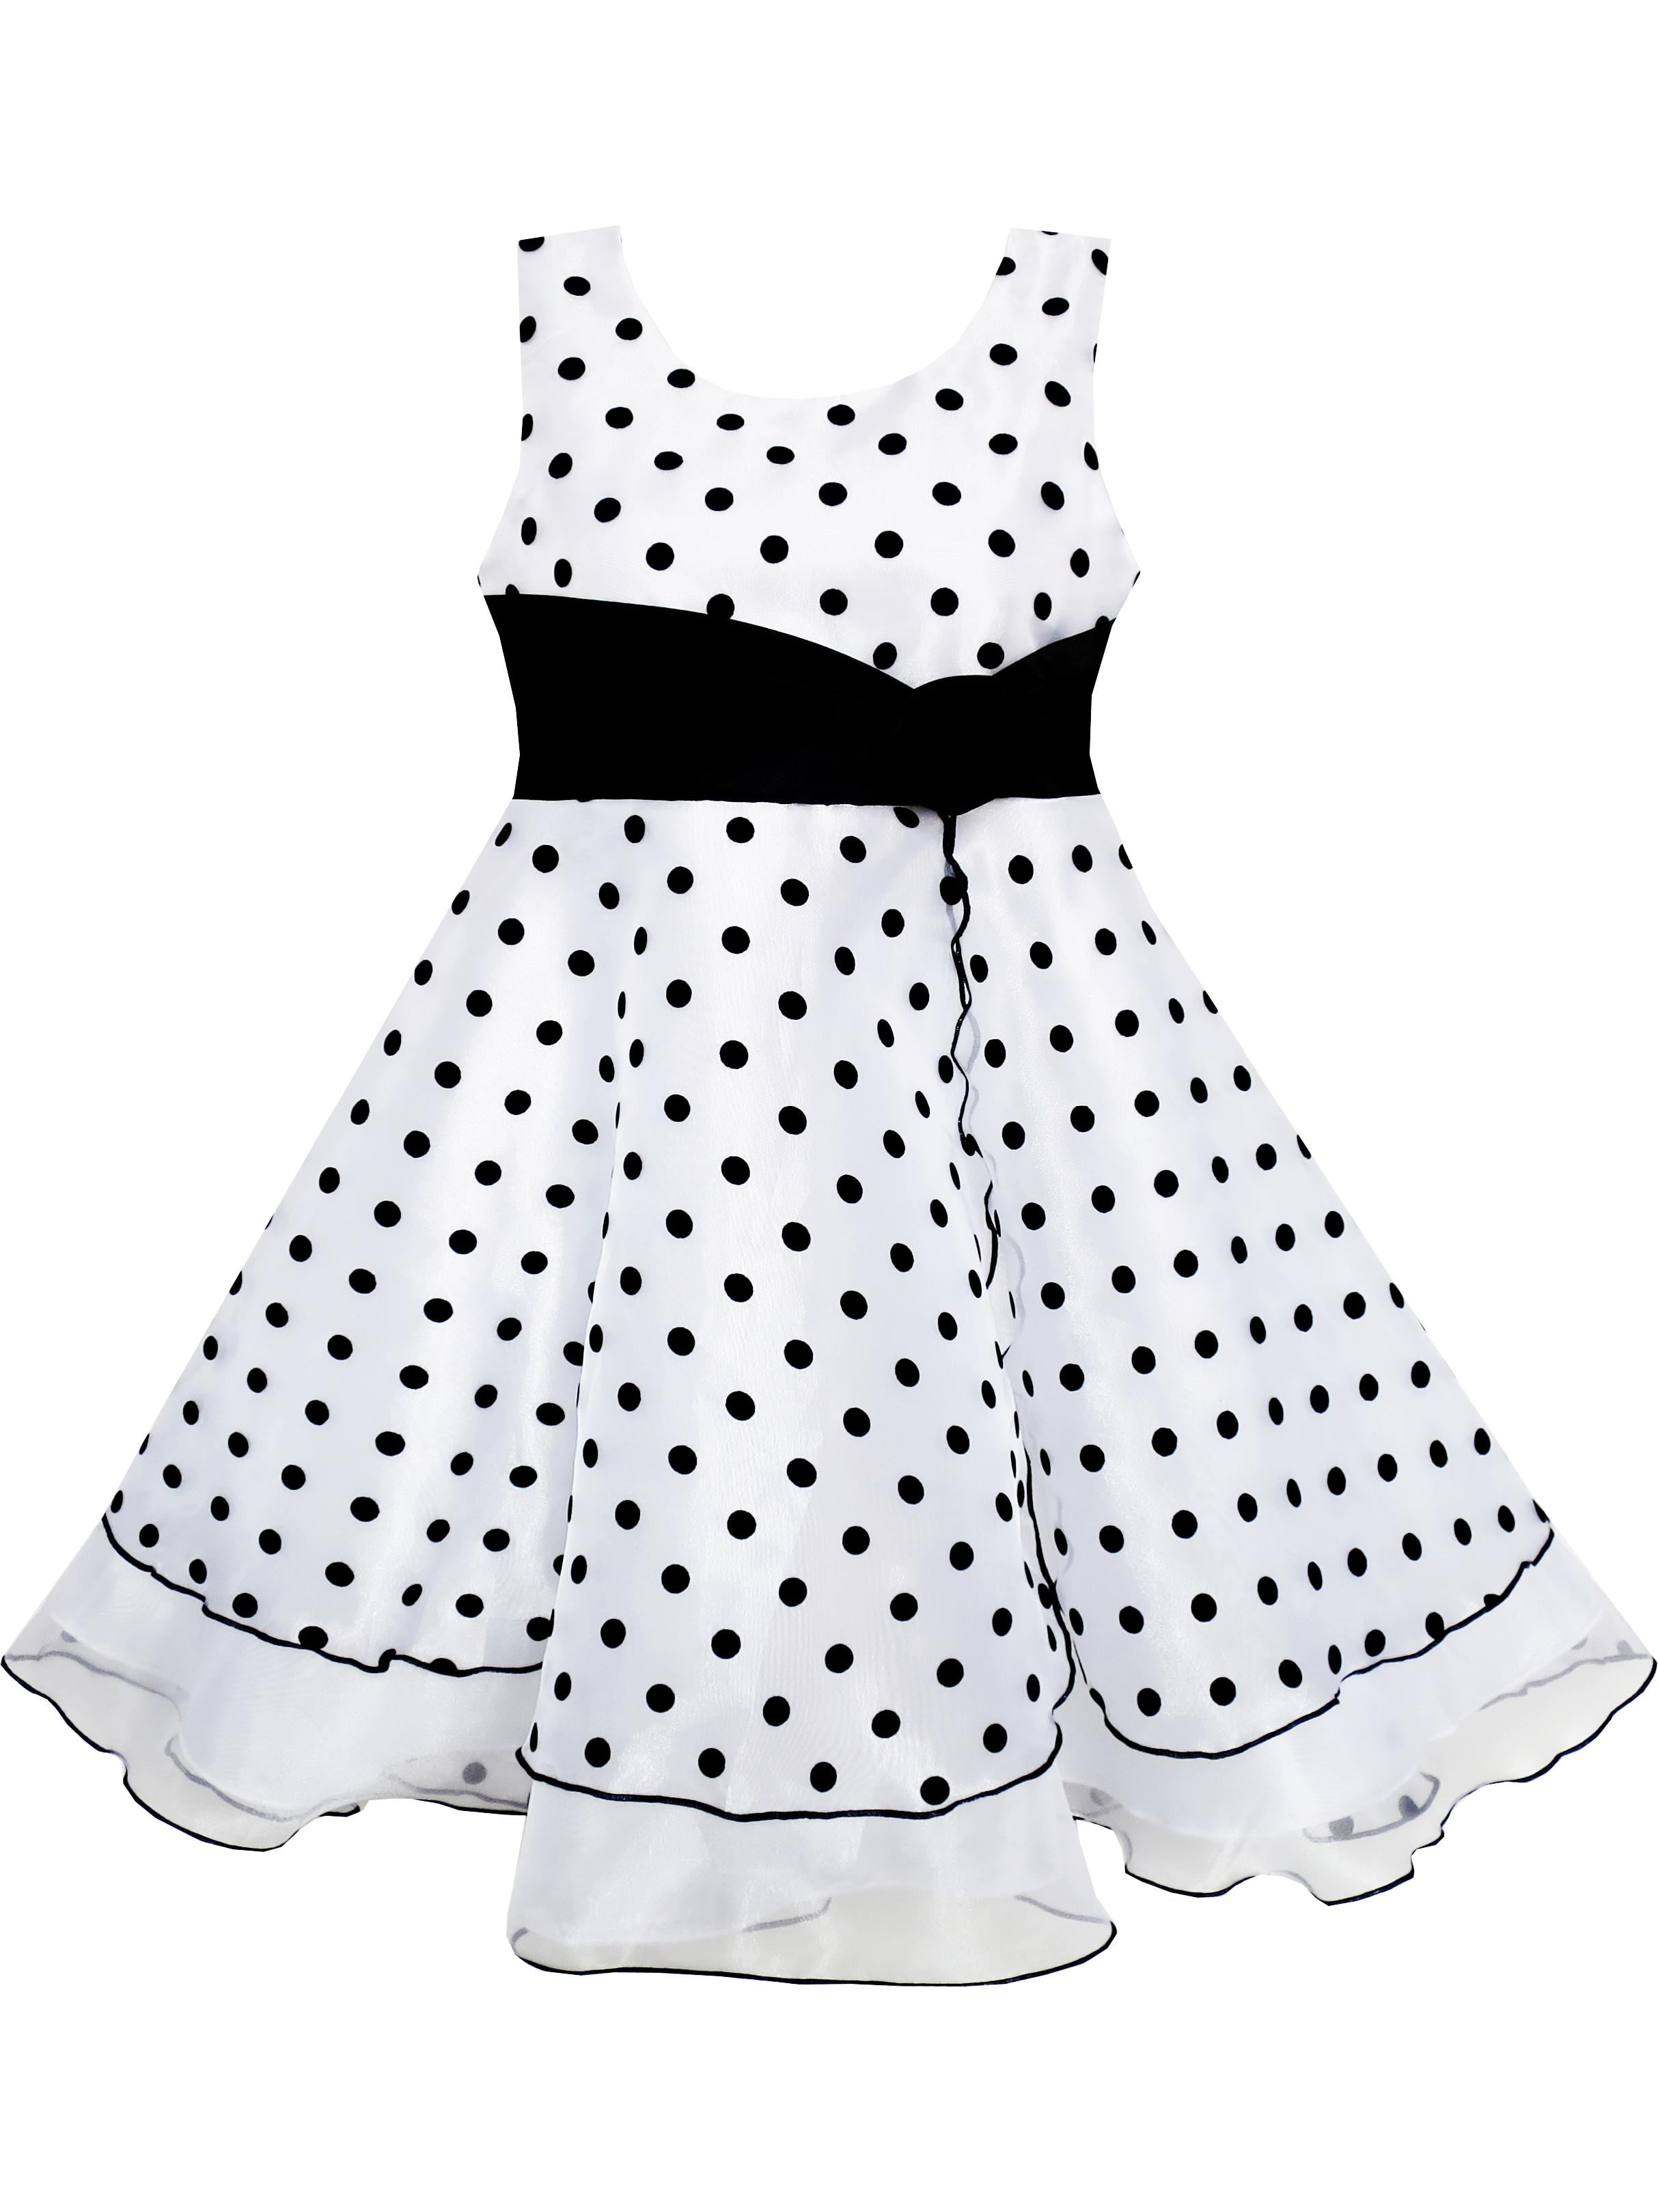 Girls Dress Black White Dot Tulle Party Pageant 9-10 Years | Walmart Canada